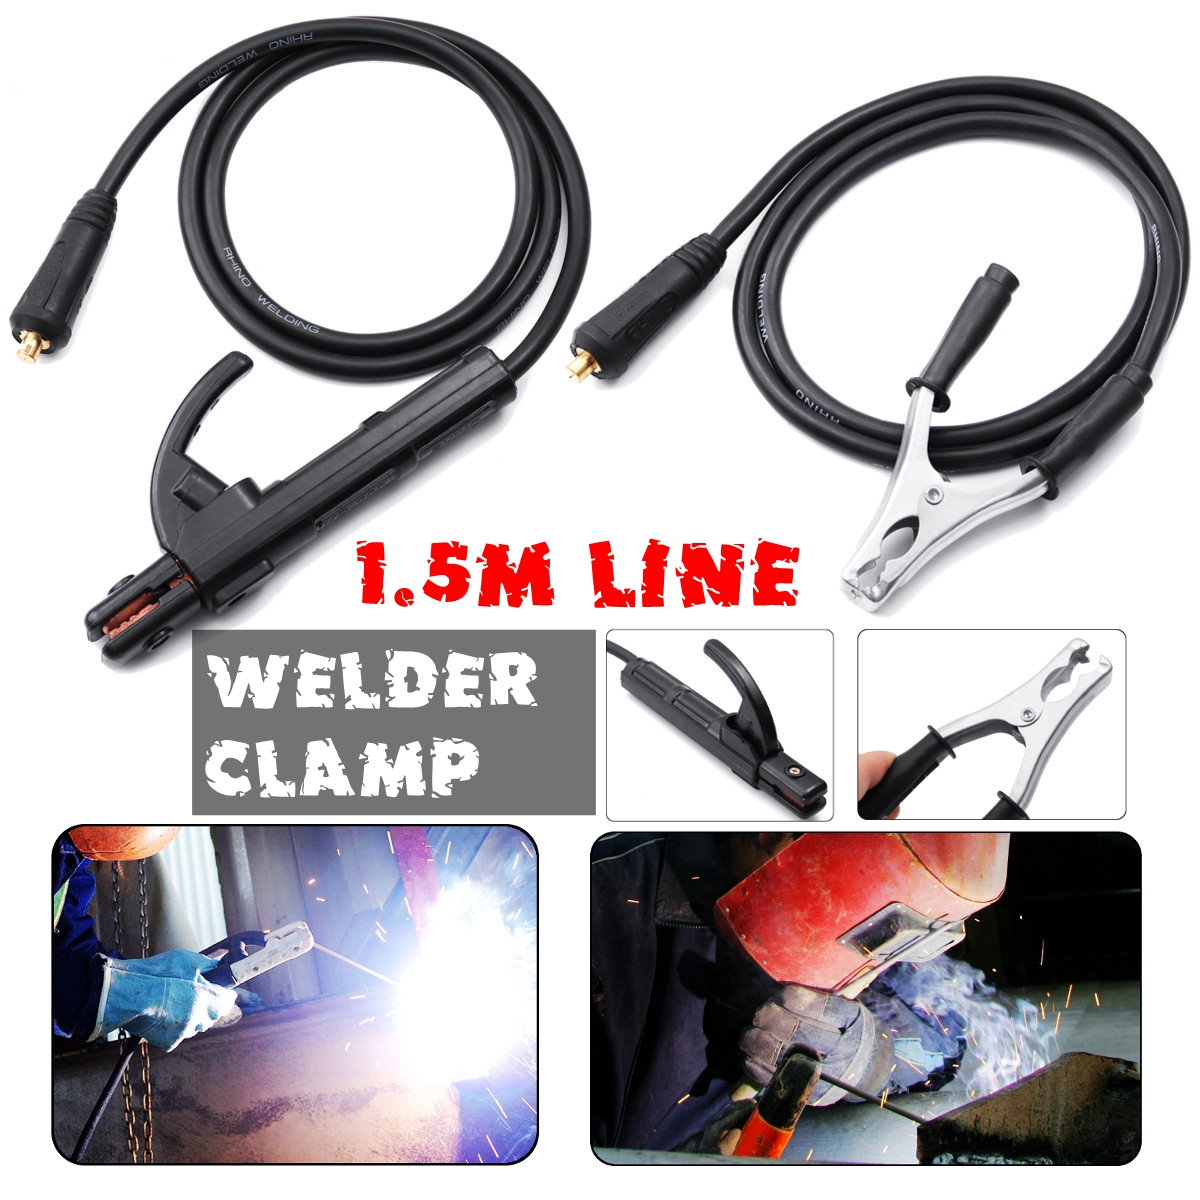 2 Pcs 300A 1.5M Electrode Holder Stick Welders /Ground Clamp Set Welding Rod Stinger Clamping Tool